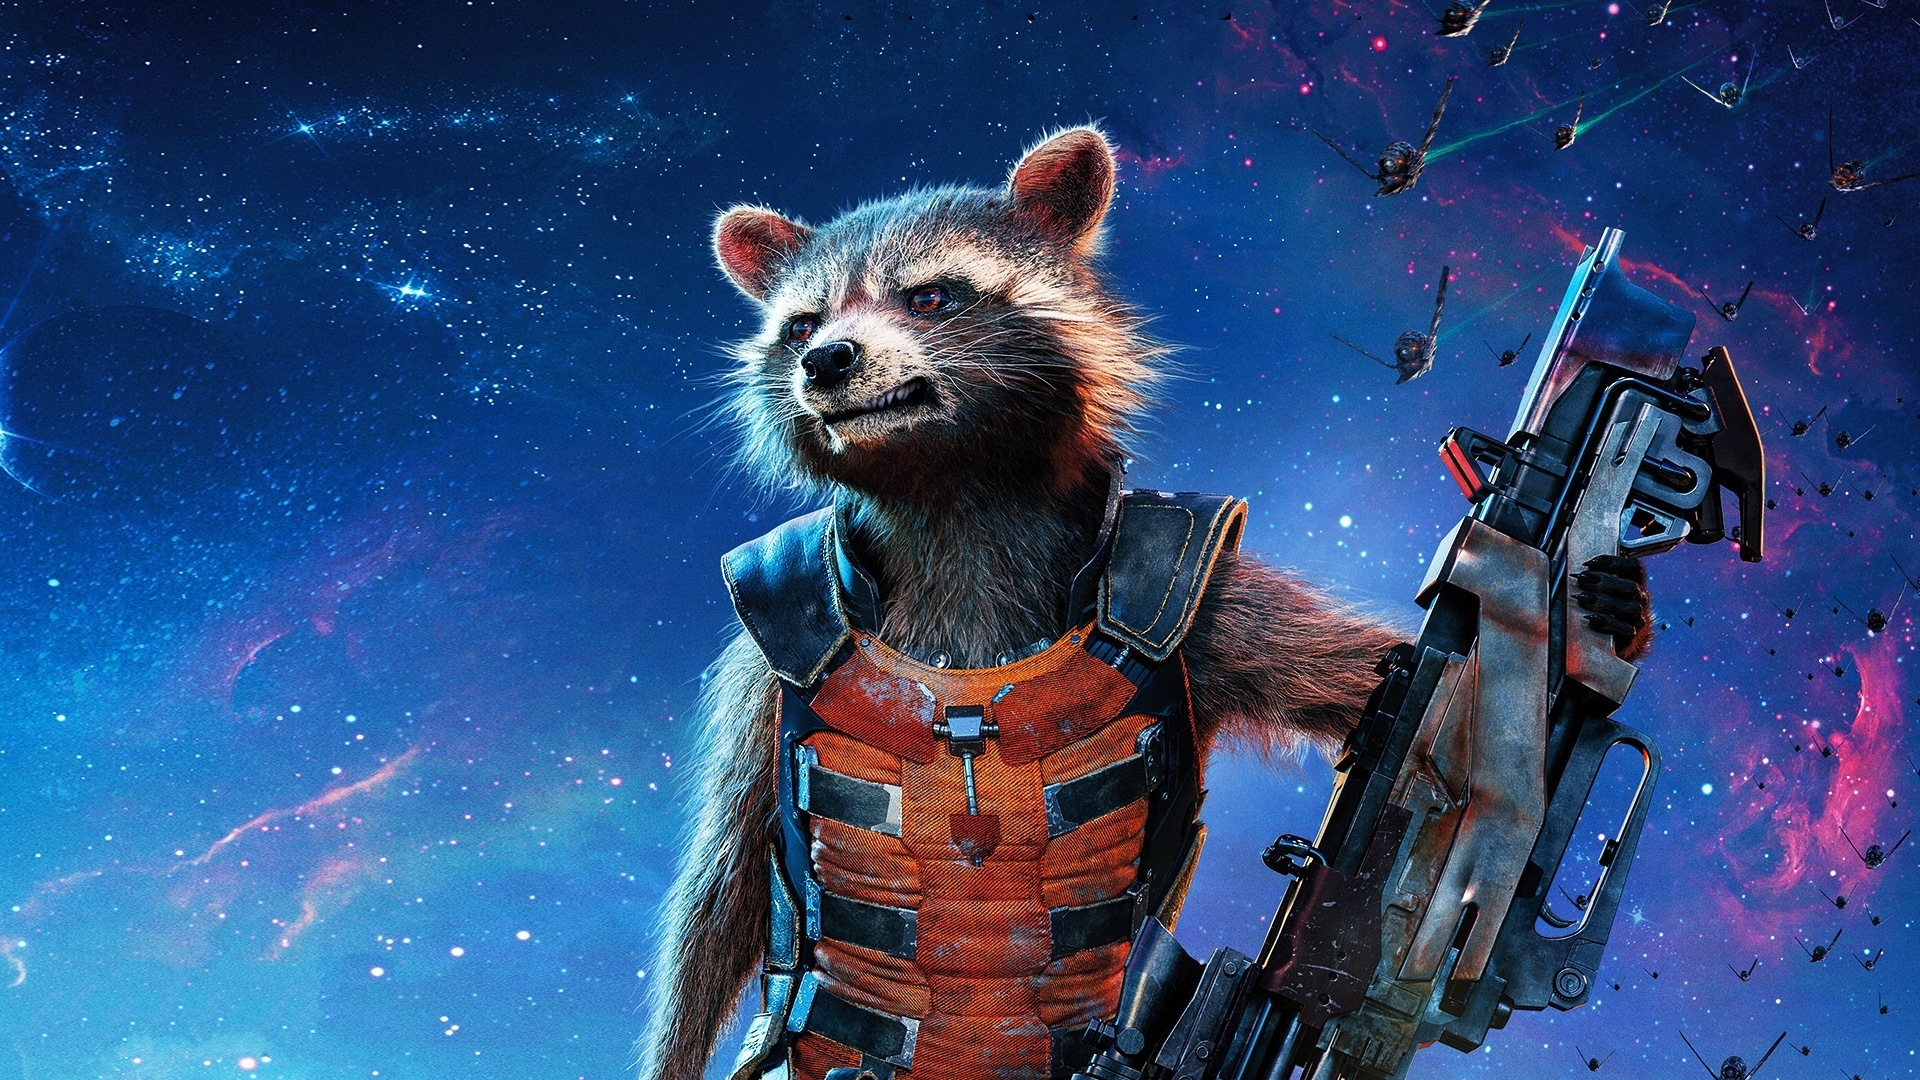 10 Most Powerful Characters From Guardians of the Galaxy Universe In MCU - 10